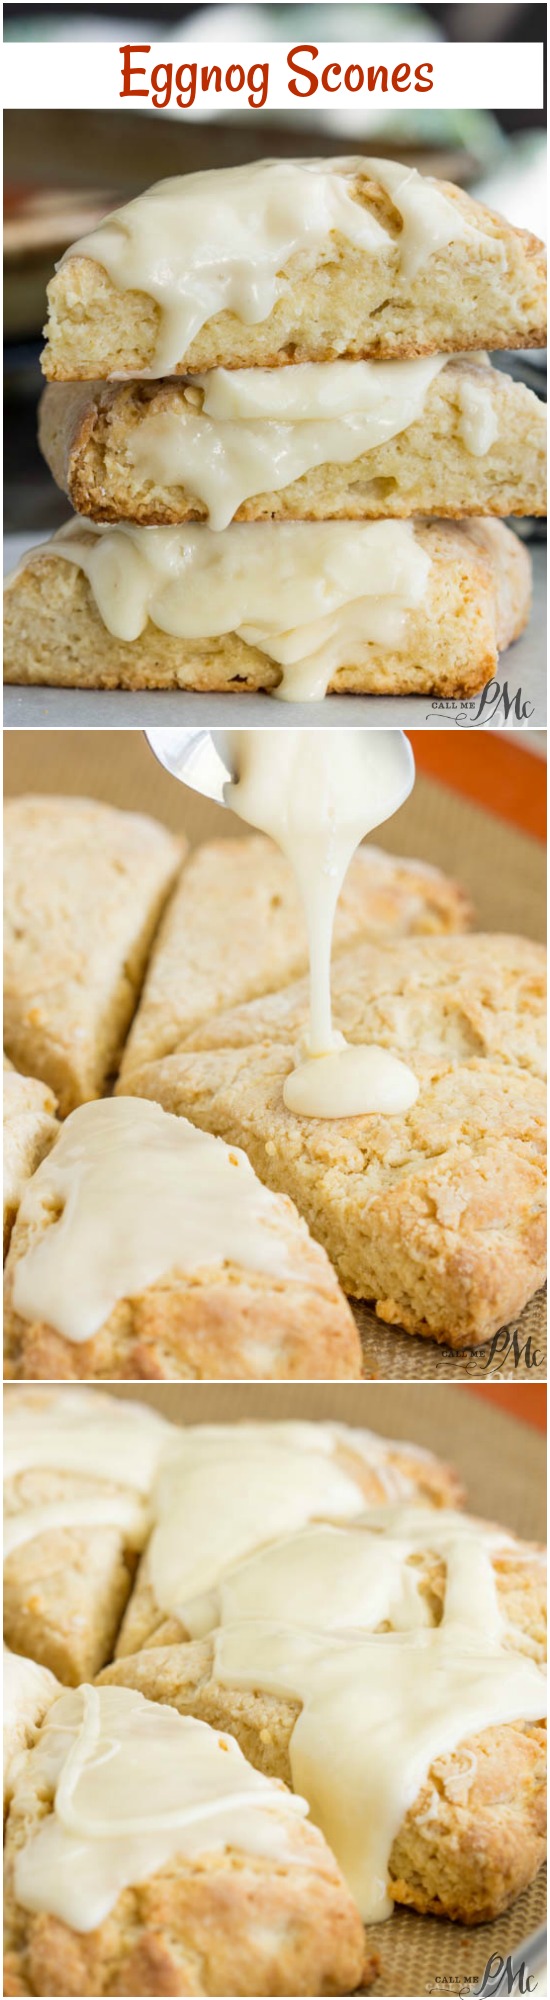 Nothing puts you in the holiday spirit more than hot Eggnog Scones and a warm mug of coffee or hot chocolate.